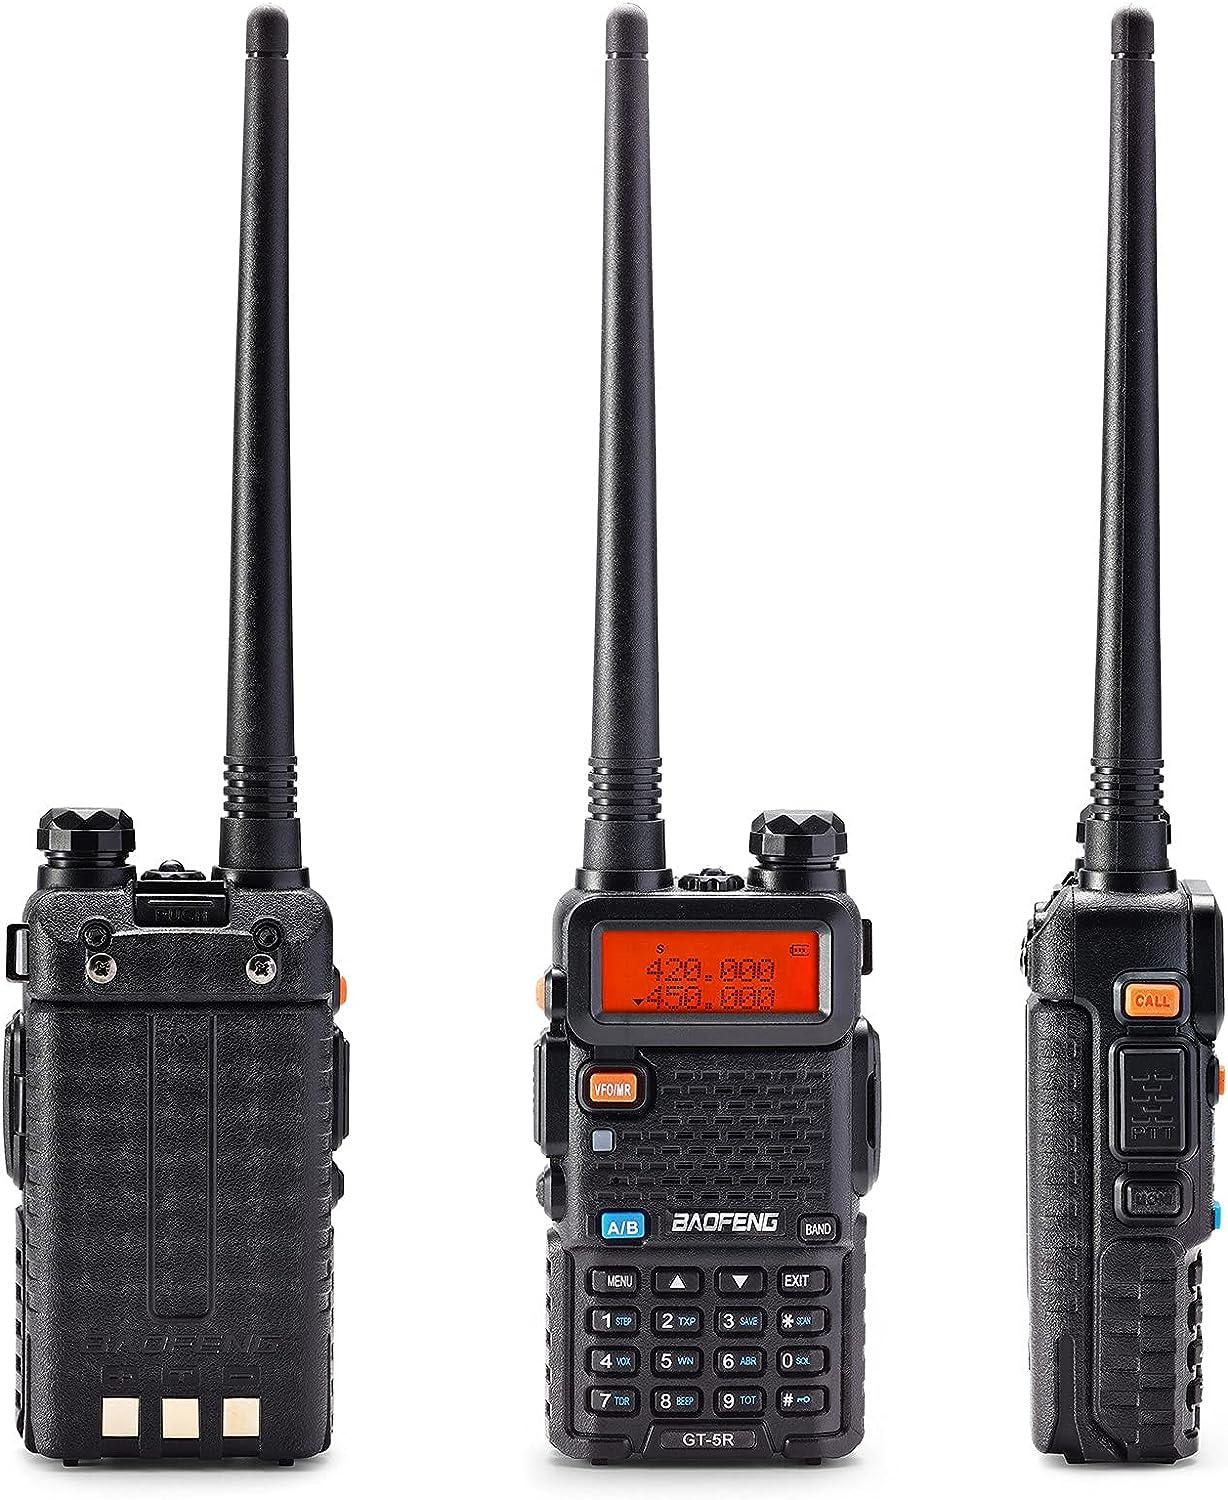 BAOFENG GT-5R Dual Band Two Way Radio 144-148/420-450MHz, FCC Compliant  Version of Baofeng UV-5R, Ham Radio Handheld for Adults, Supports Chirp